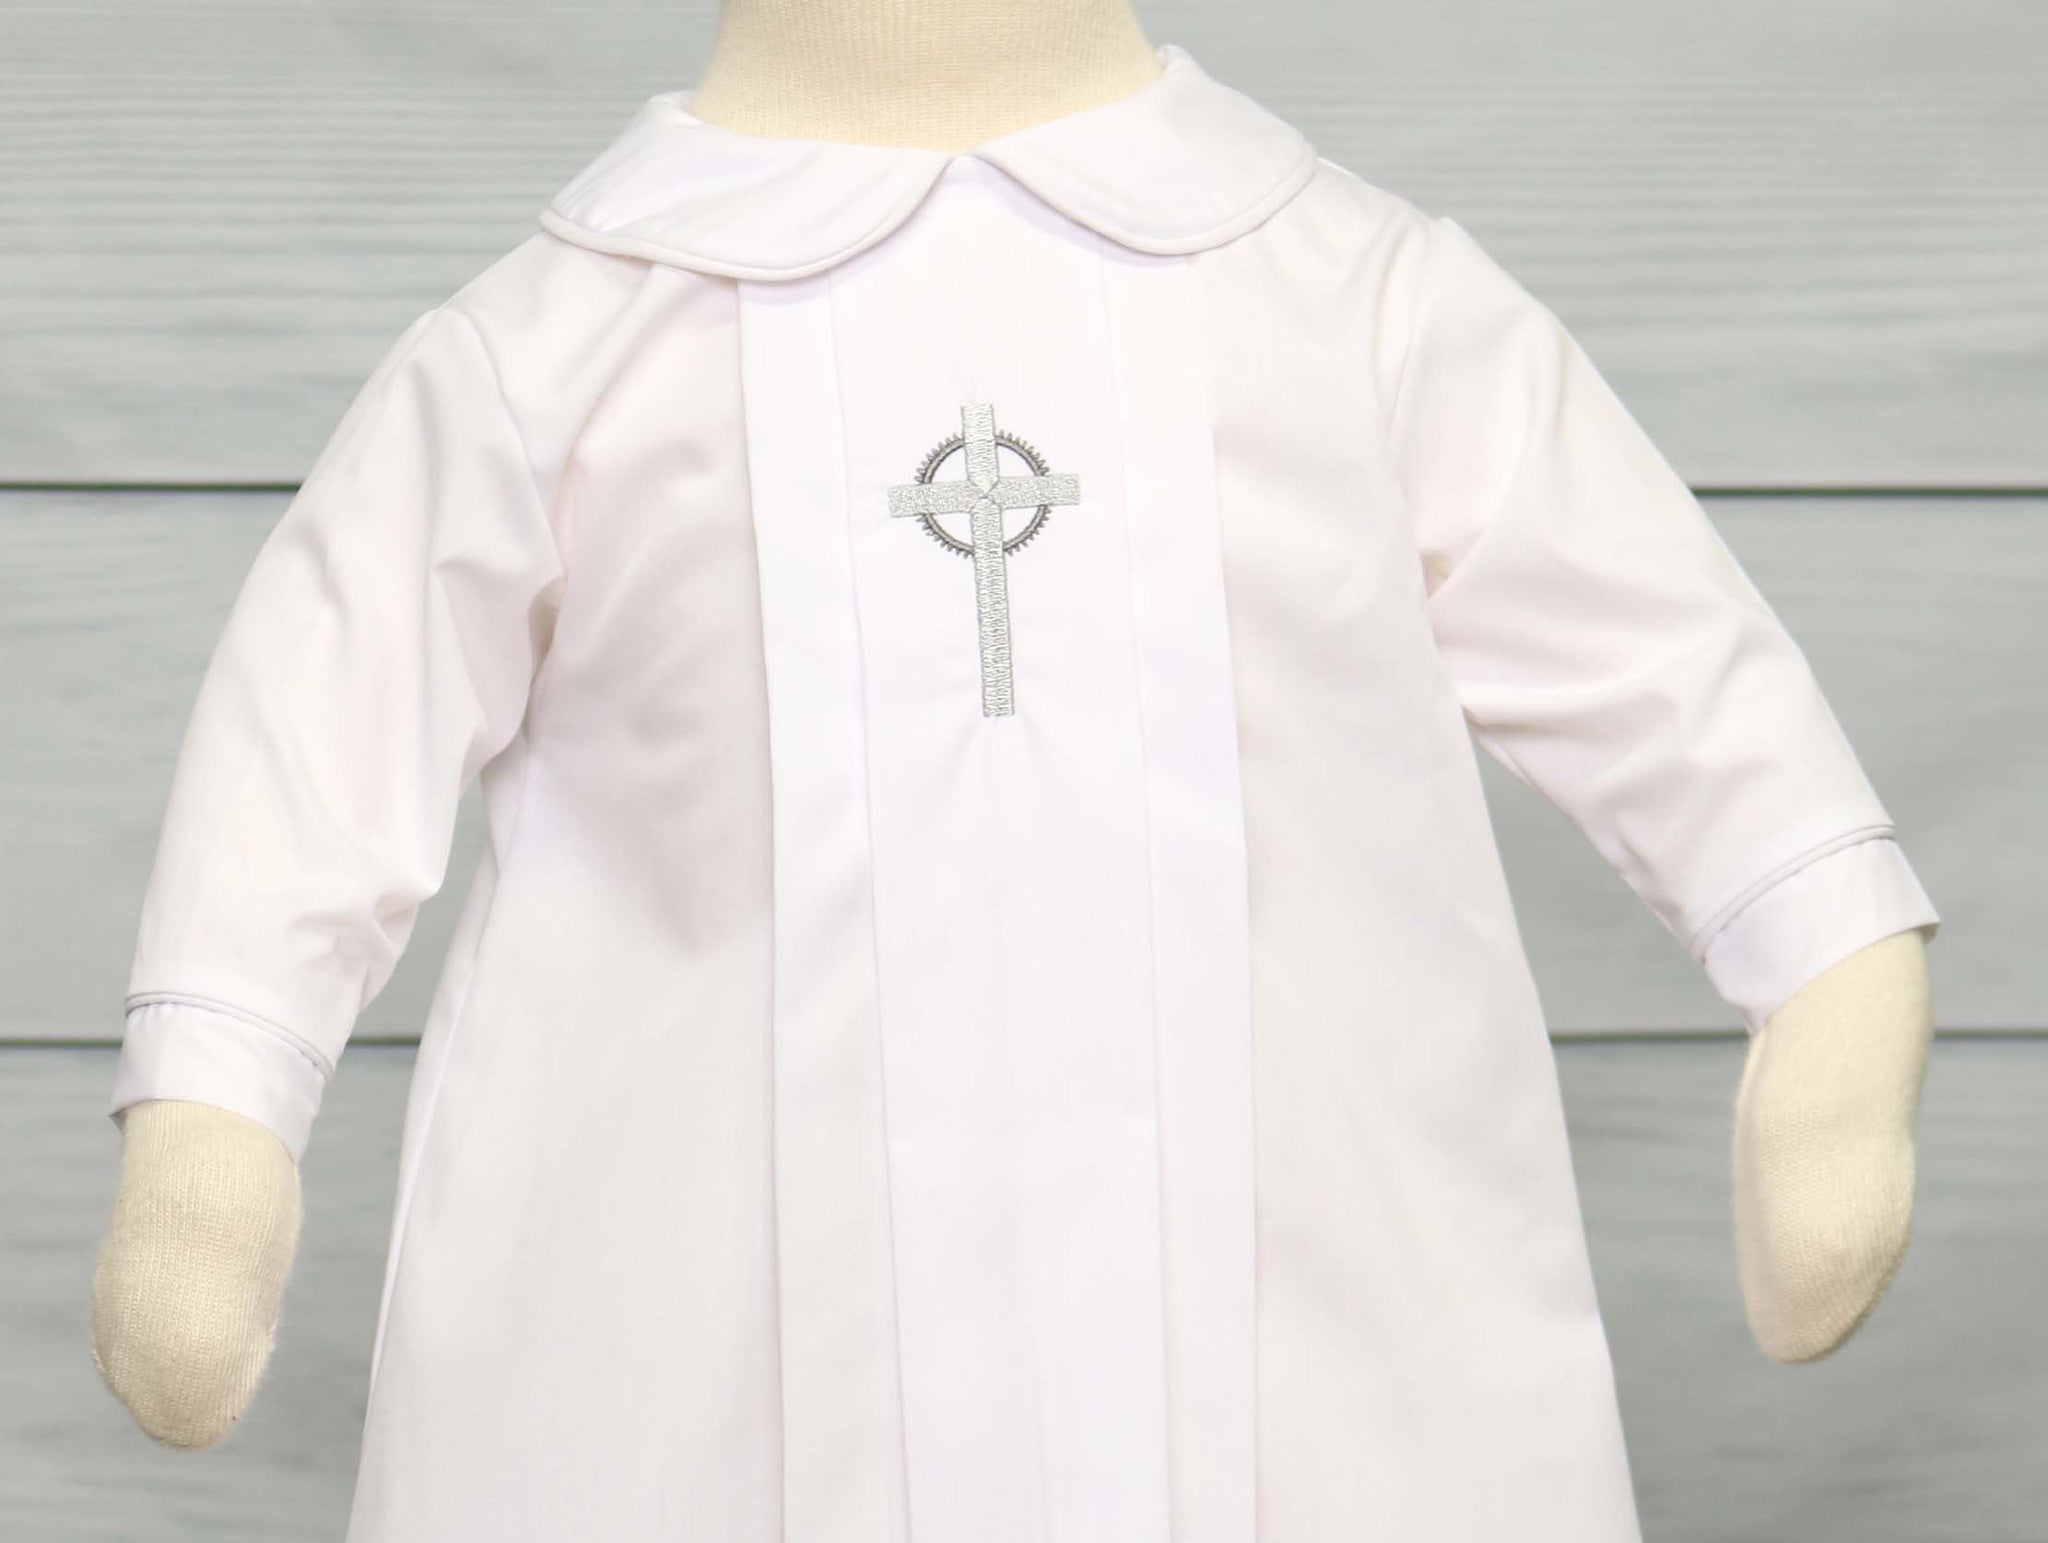 baptism outfits